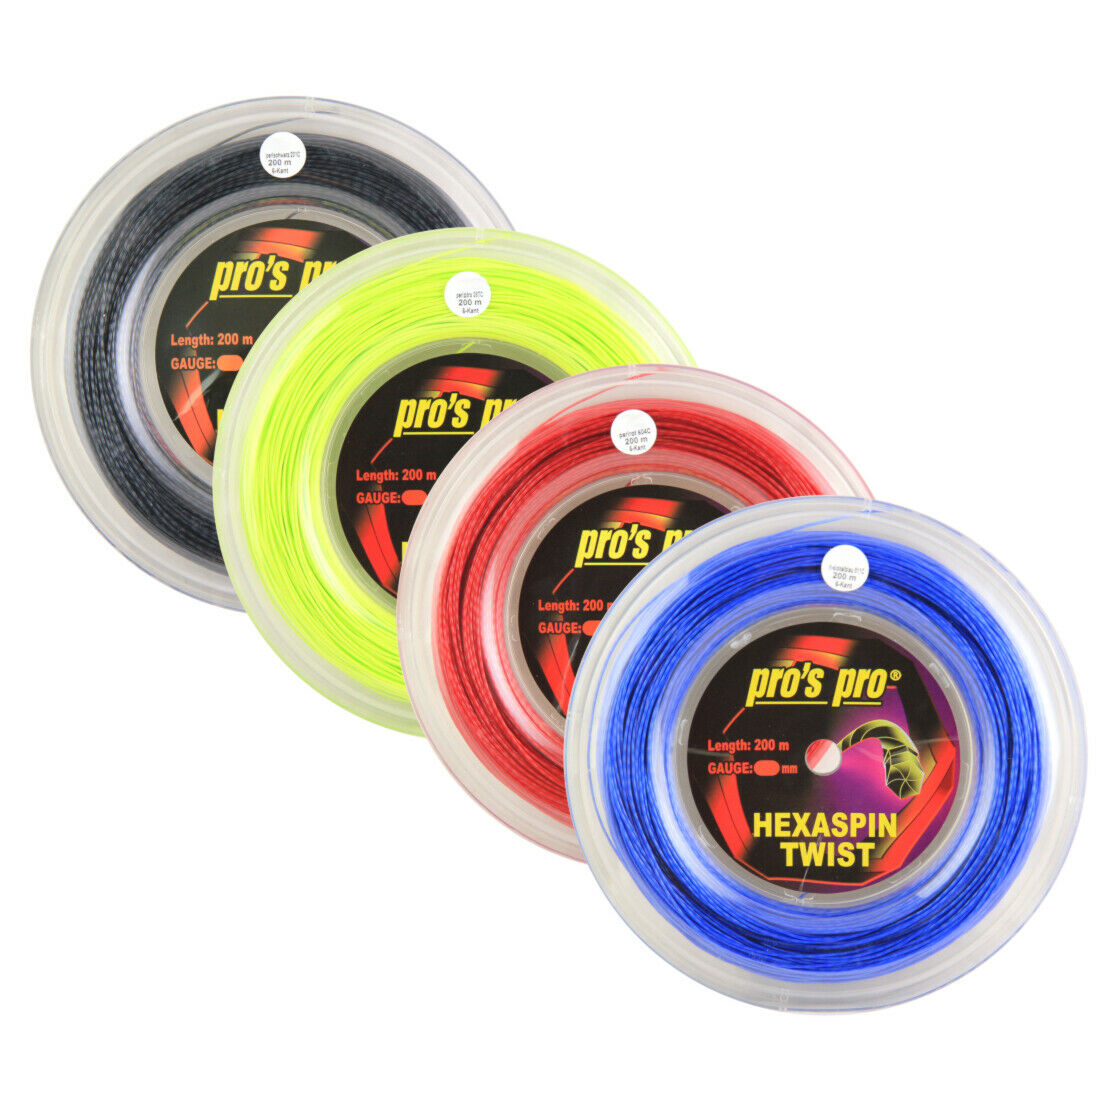 Pro's Pro Hexaspin Twist Tennis String - 200m Reel - Assorted - Made In Germany